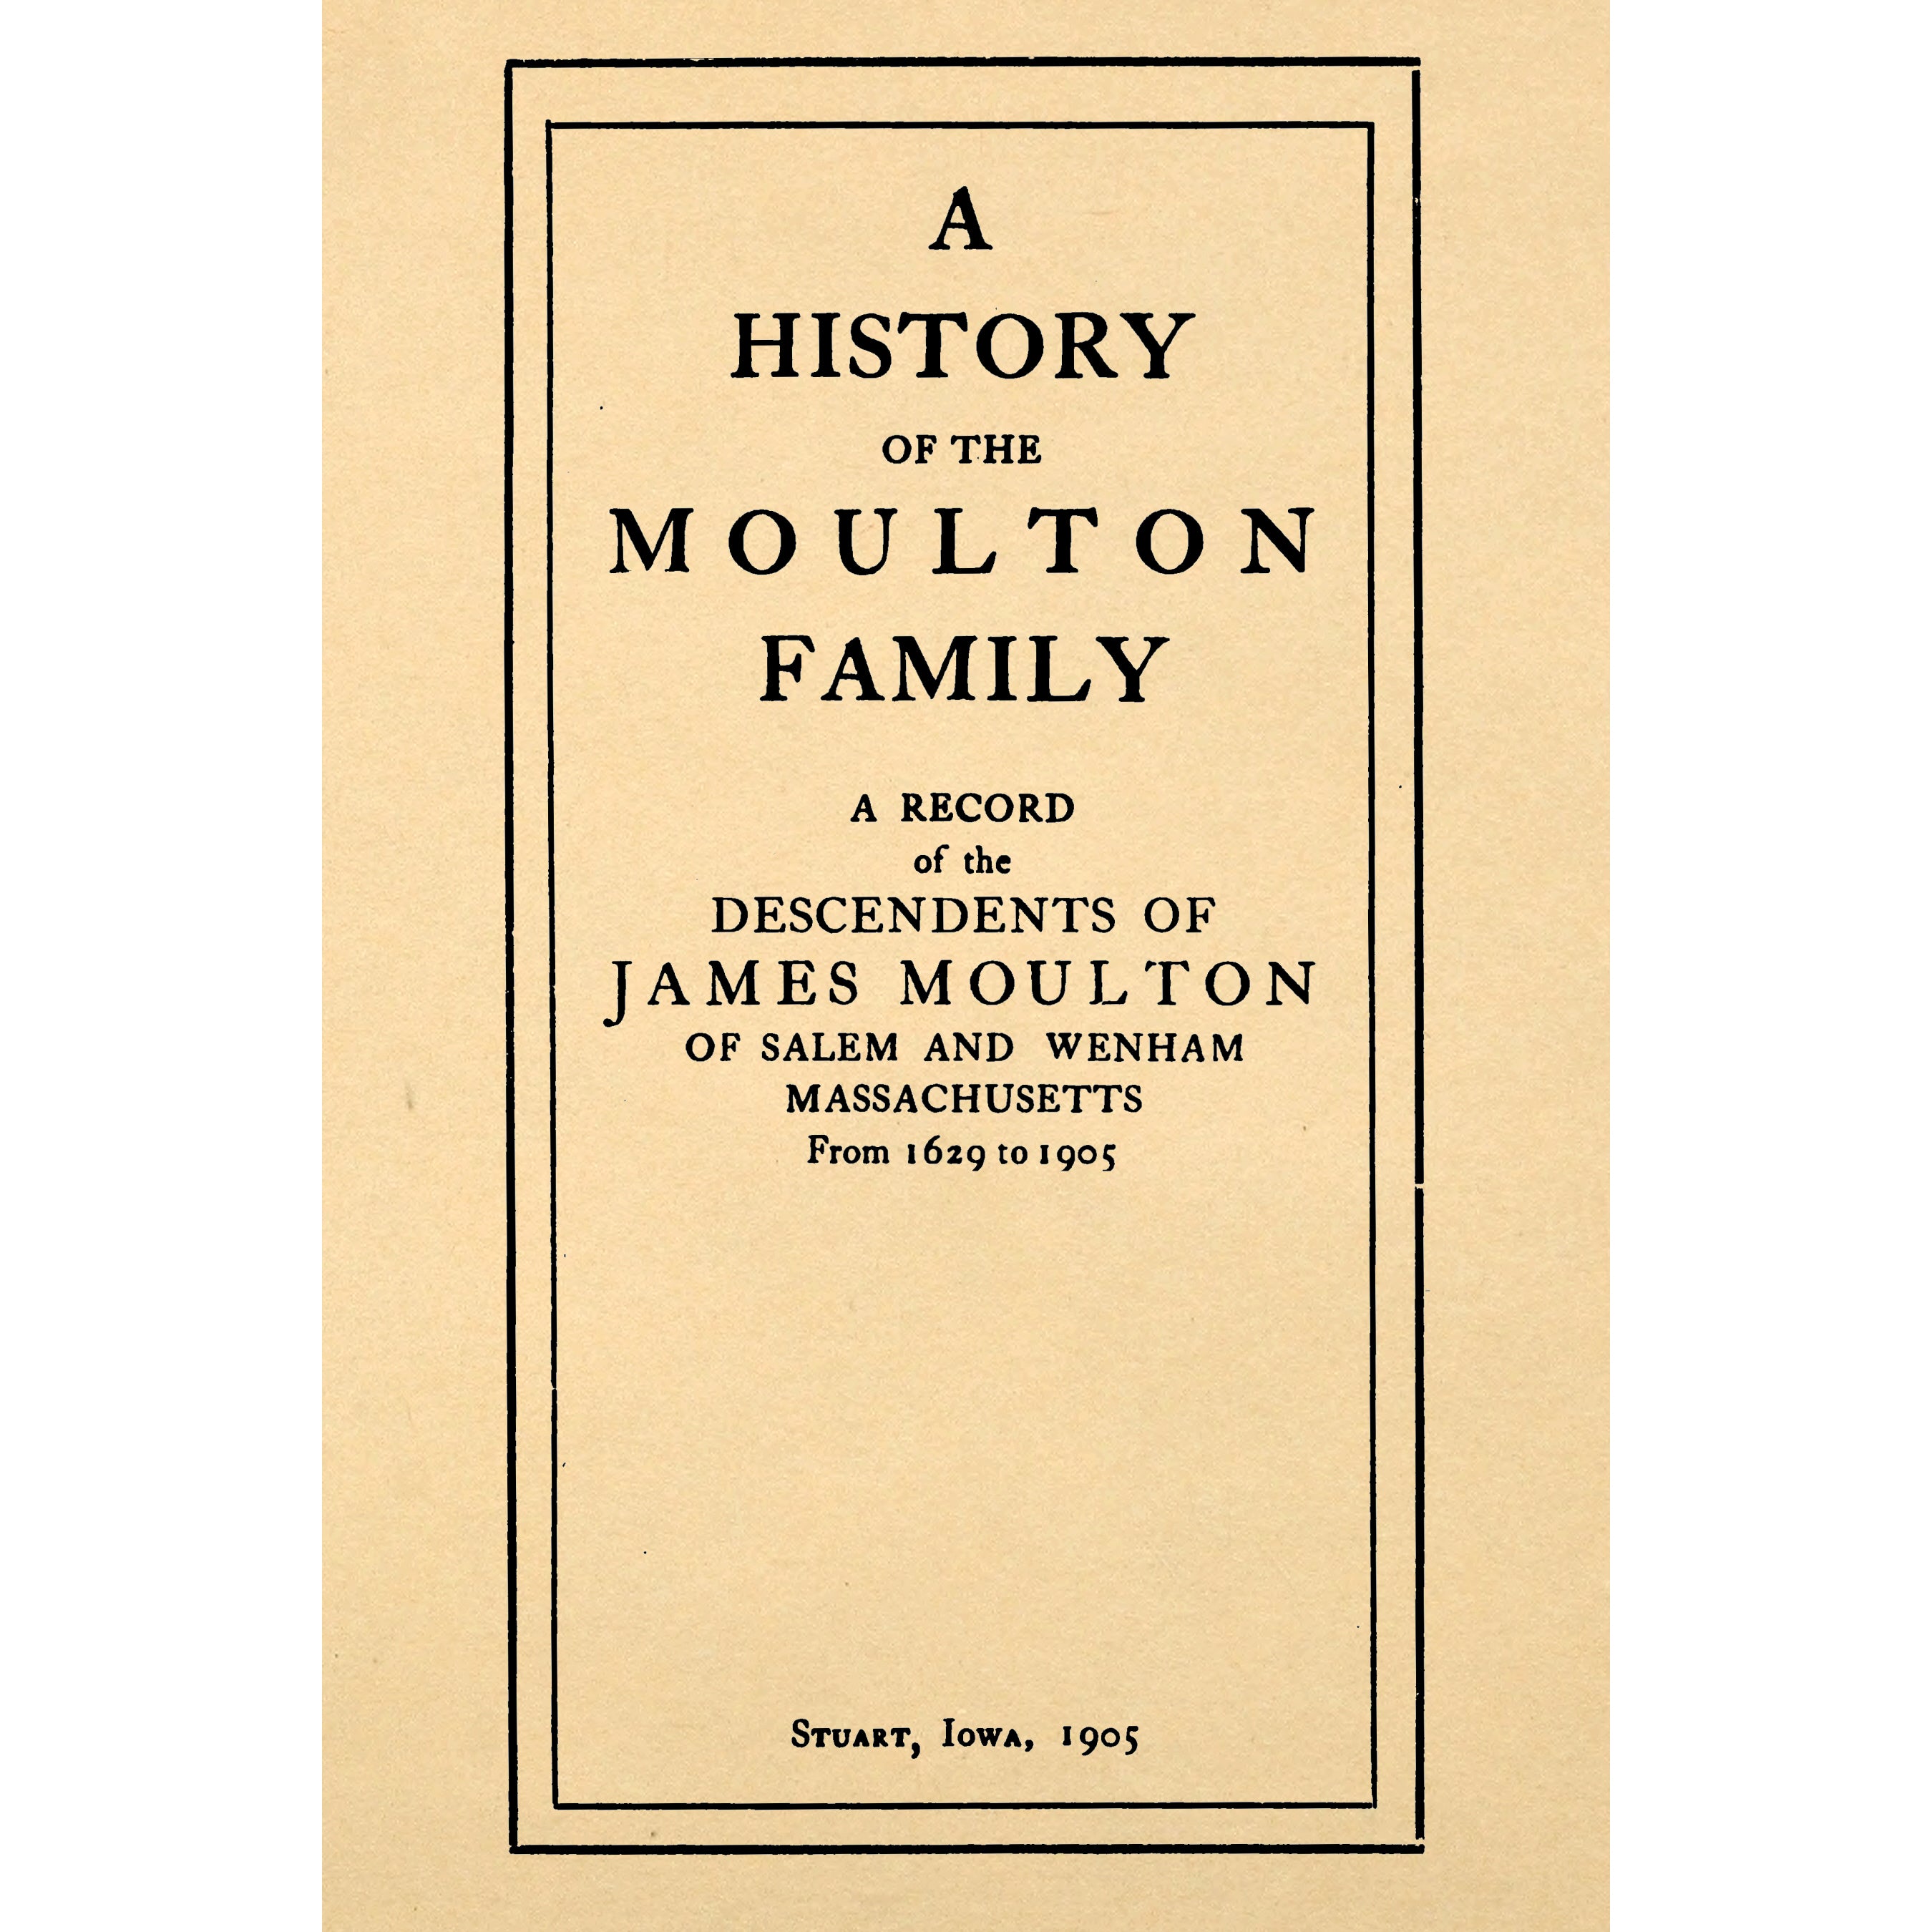 A History of the Moulton Family,